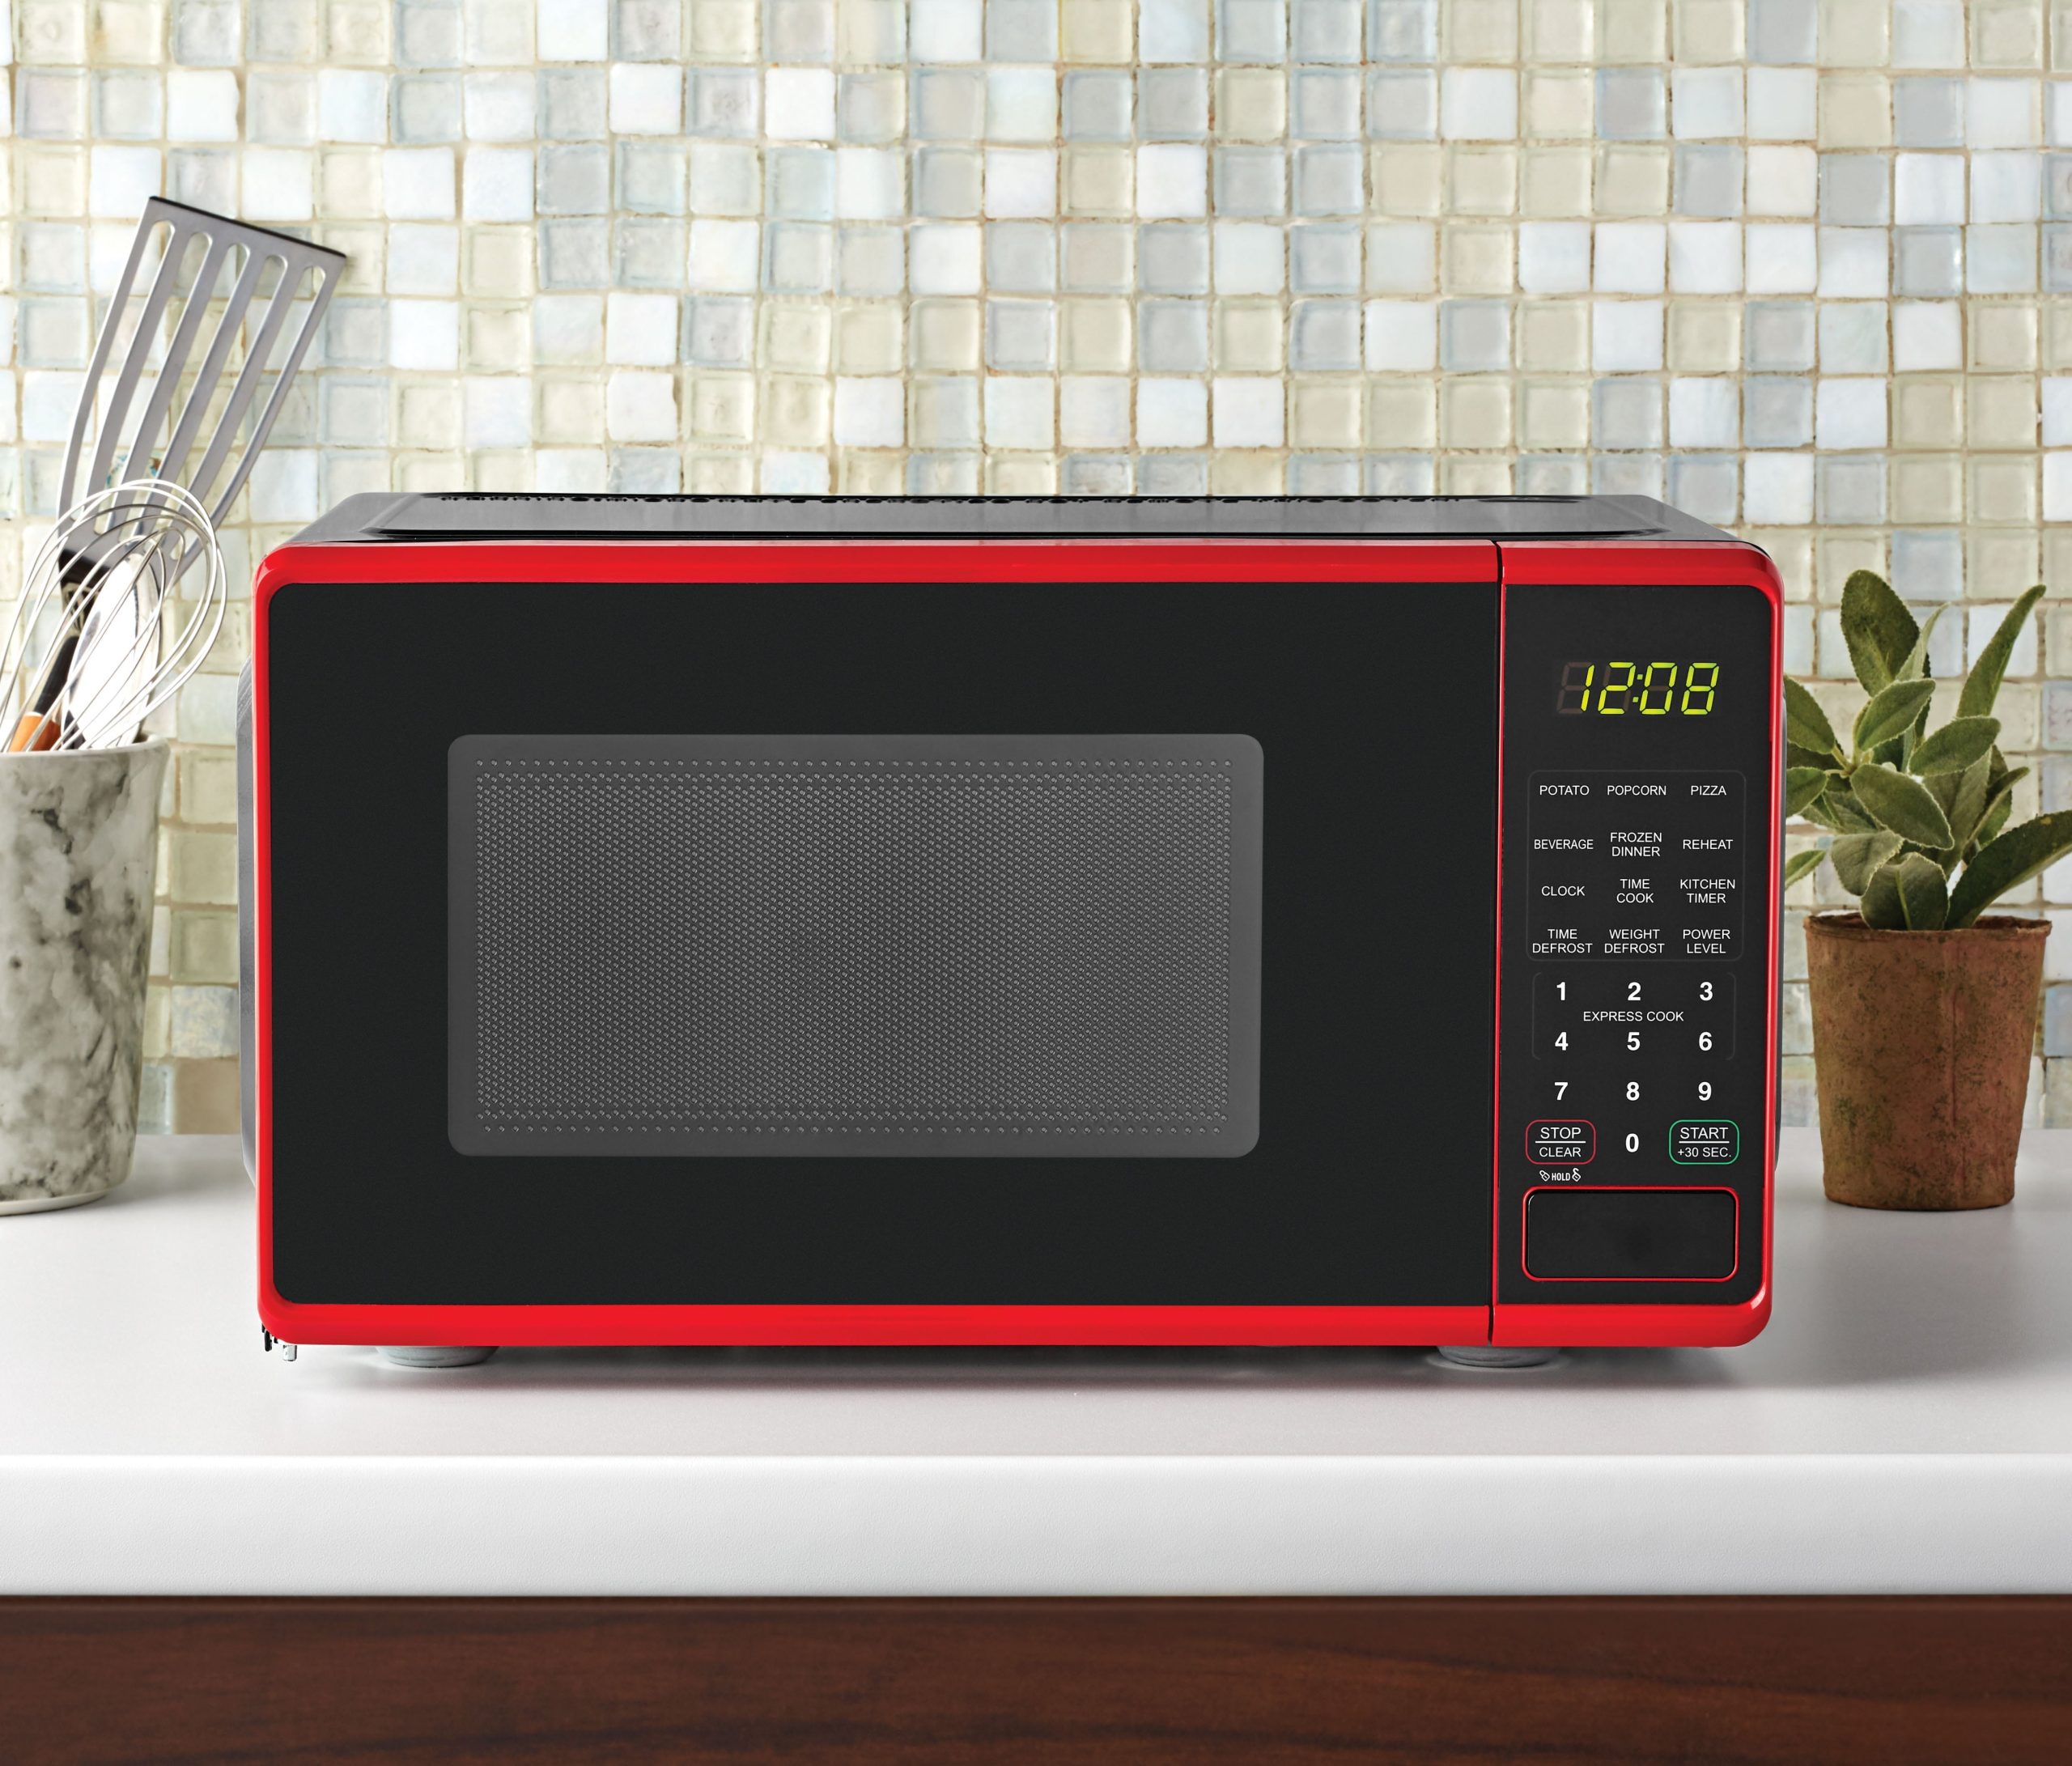 https://www.mddcprint.shop/wp-content/uploads/1686/72/stay-fit-and-active-keep-active-and-fit-0-7-cu-ft-compact-countertop-microwave-oven-black-portable-microwave-oven-md-dc-print_1-scaled.jpg